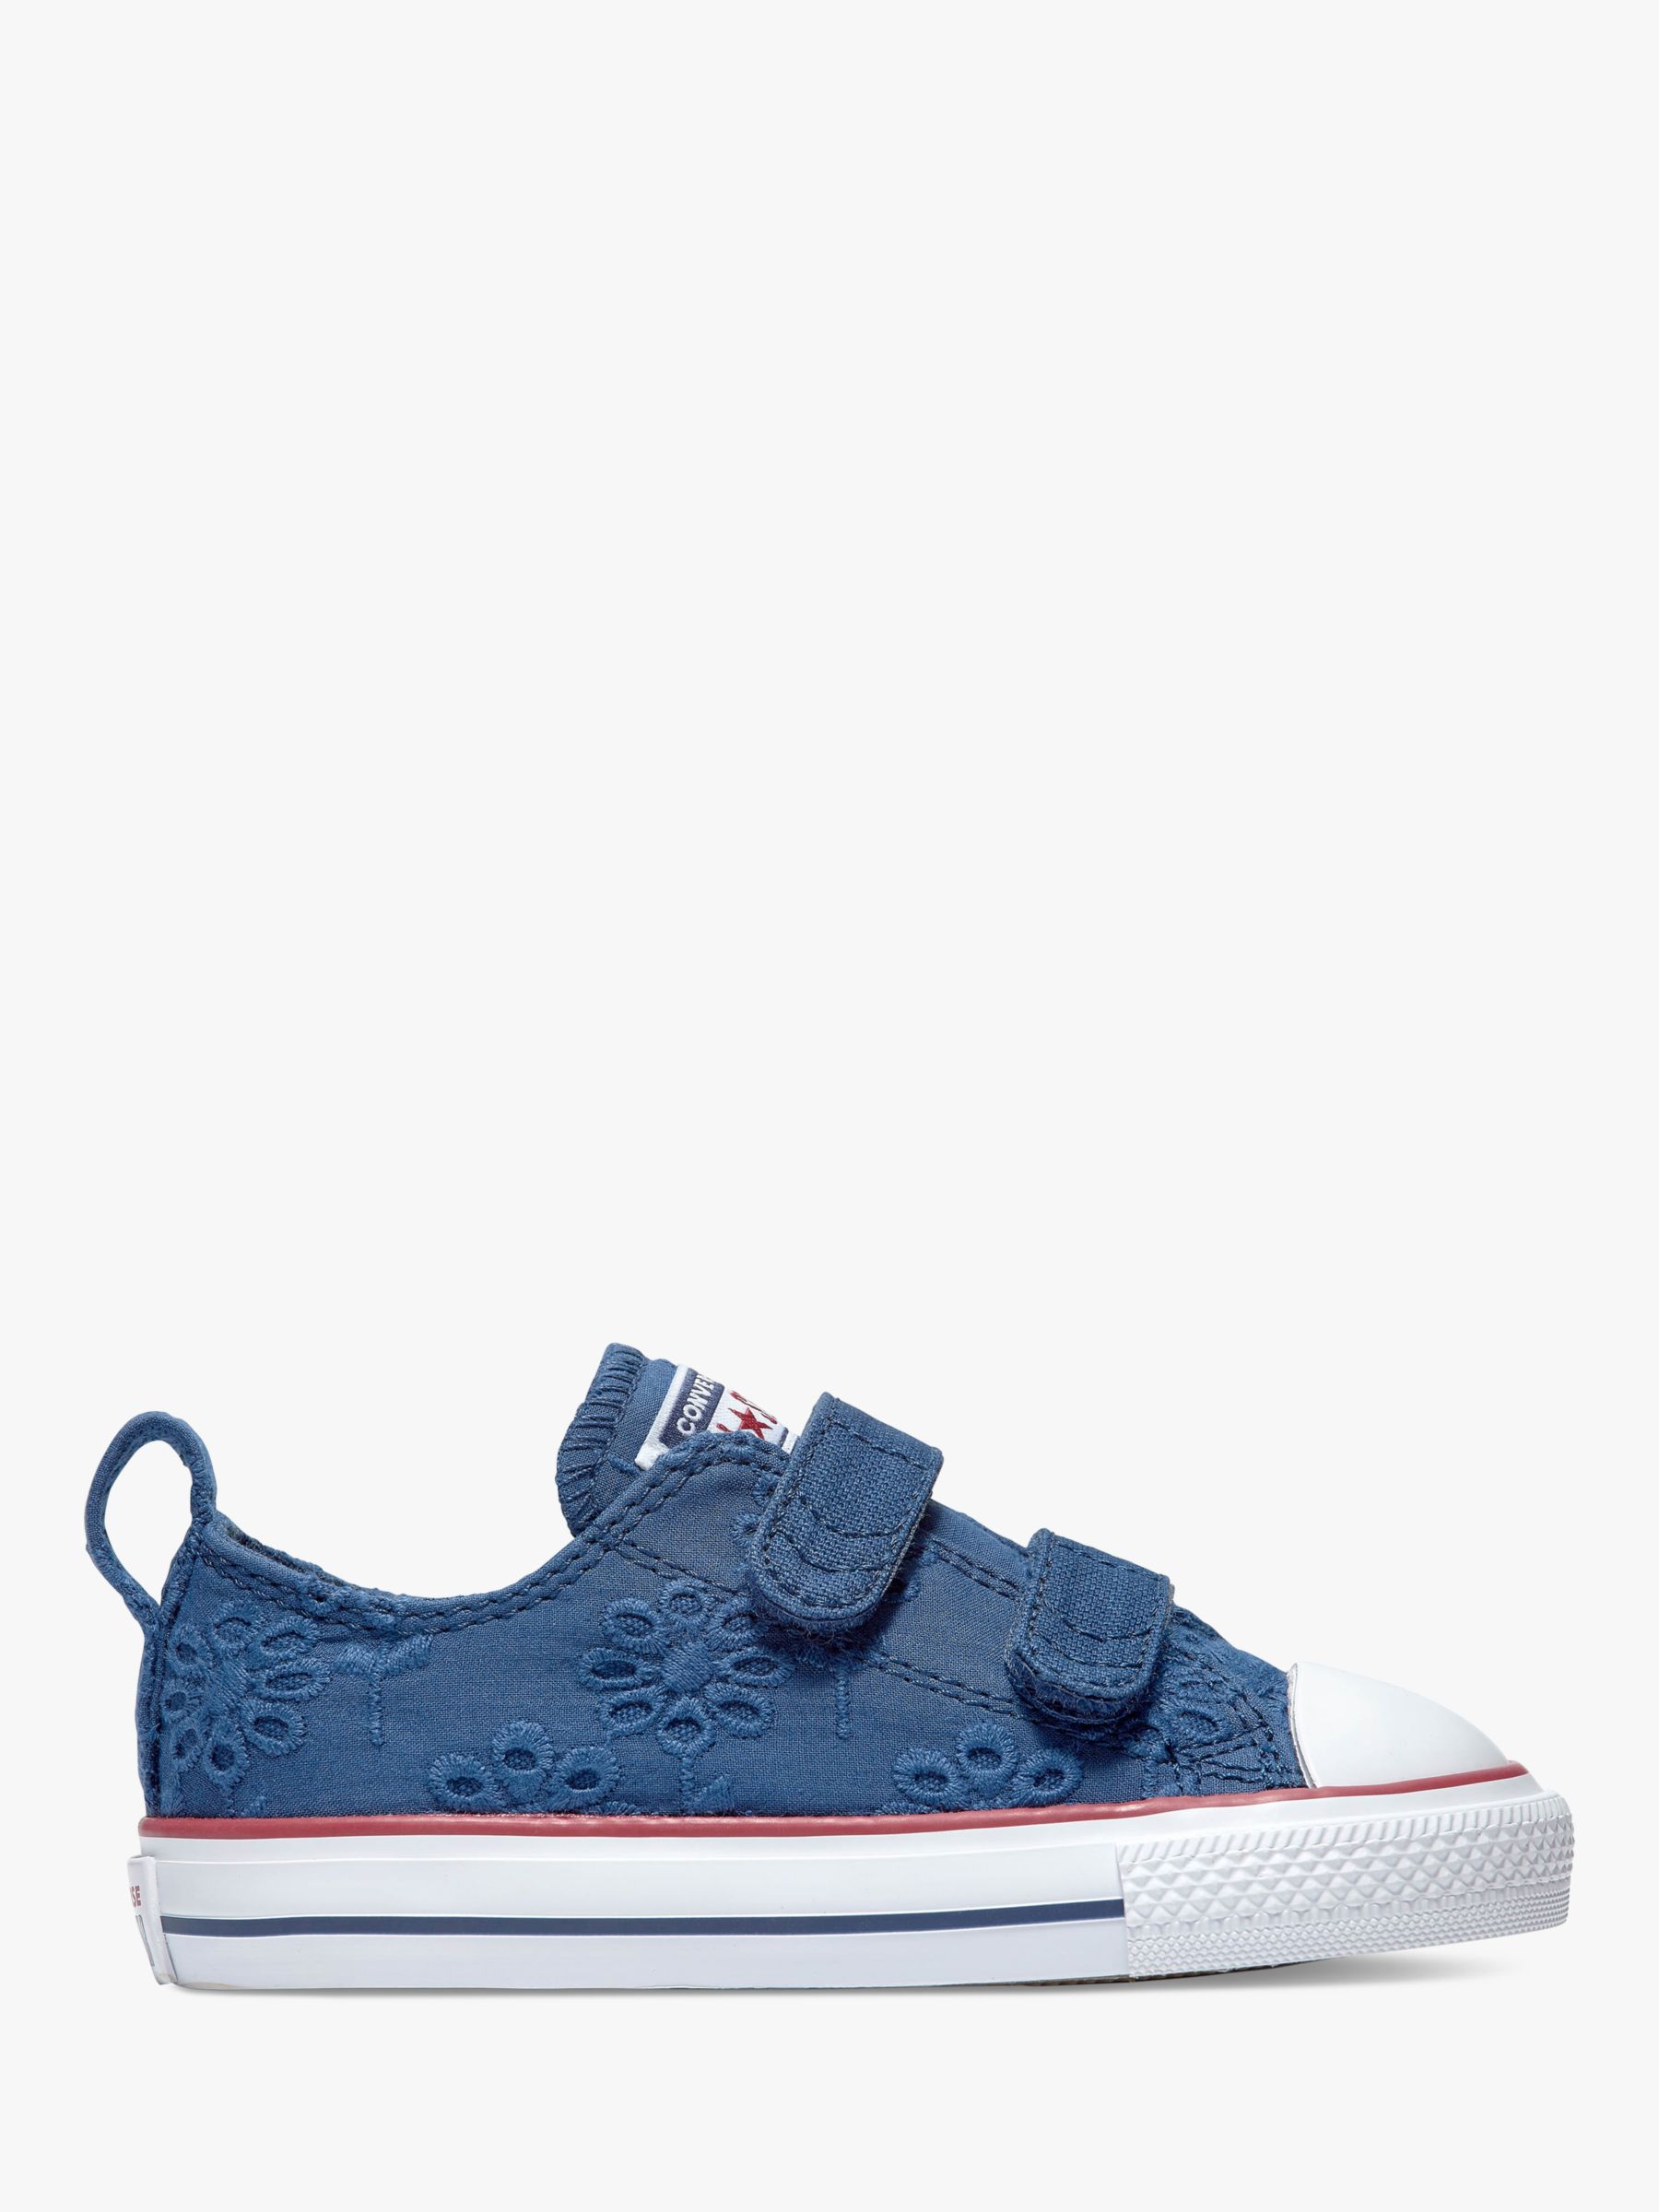 converse childrens navy all star trainers